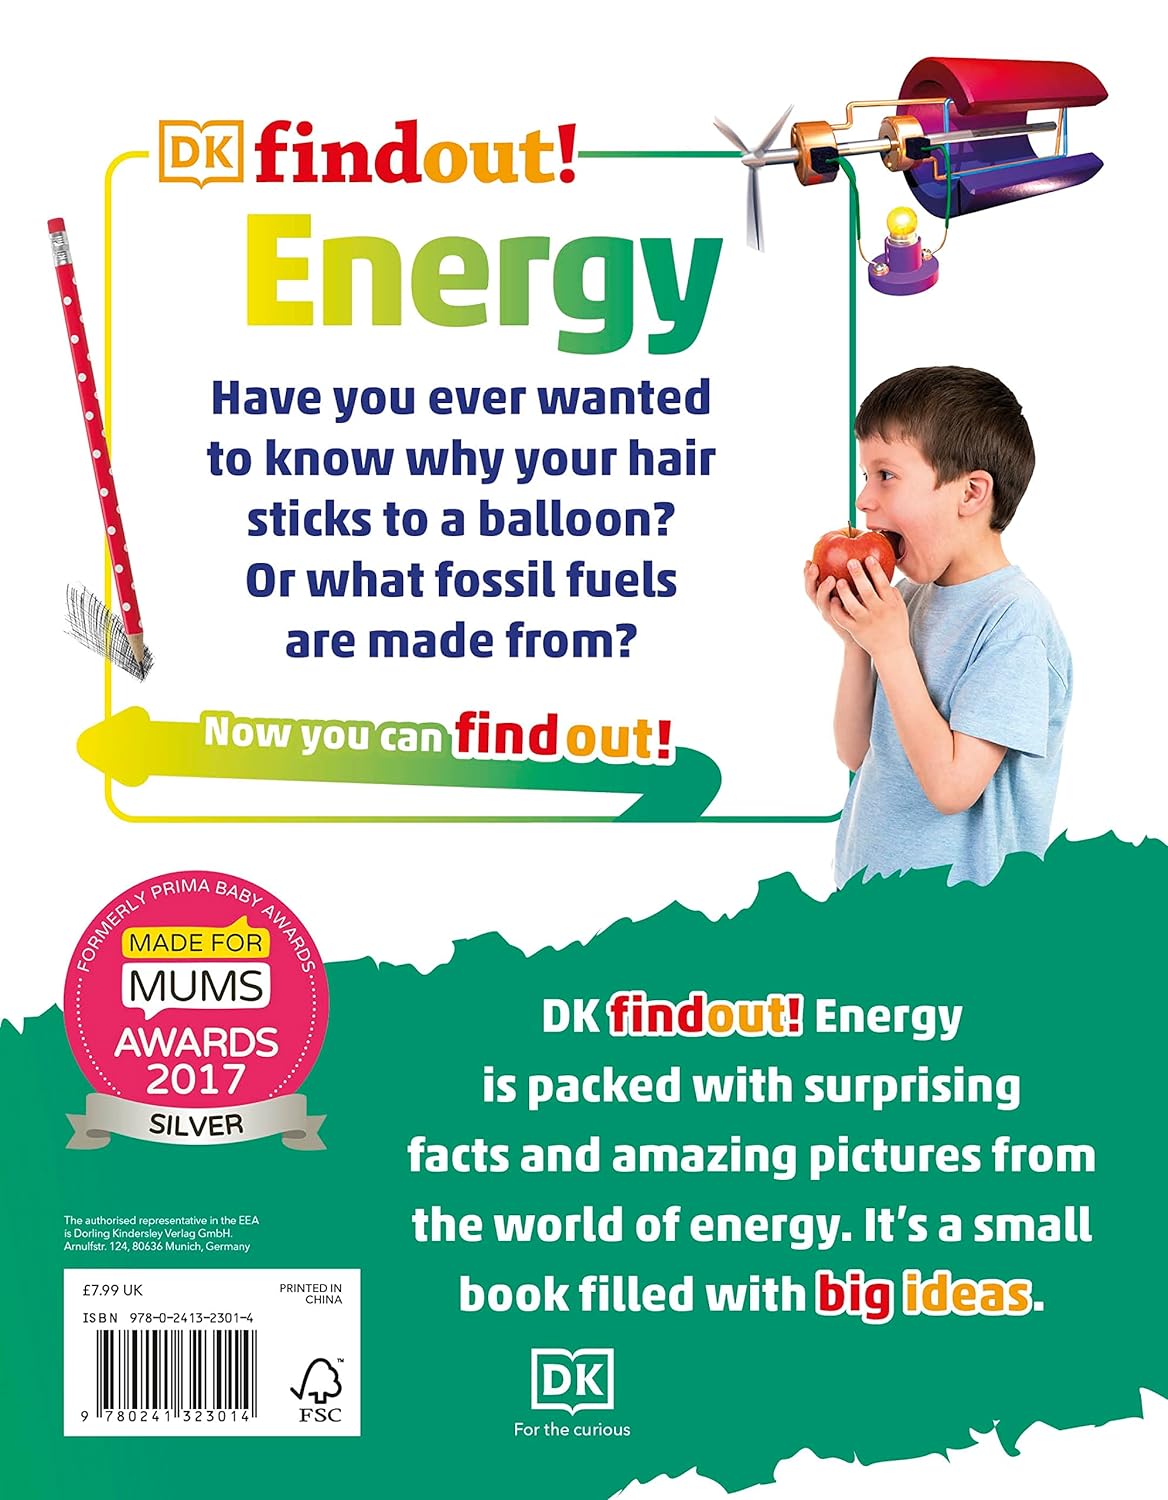 Dkfindout!: Energy